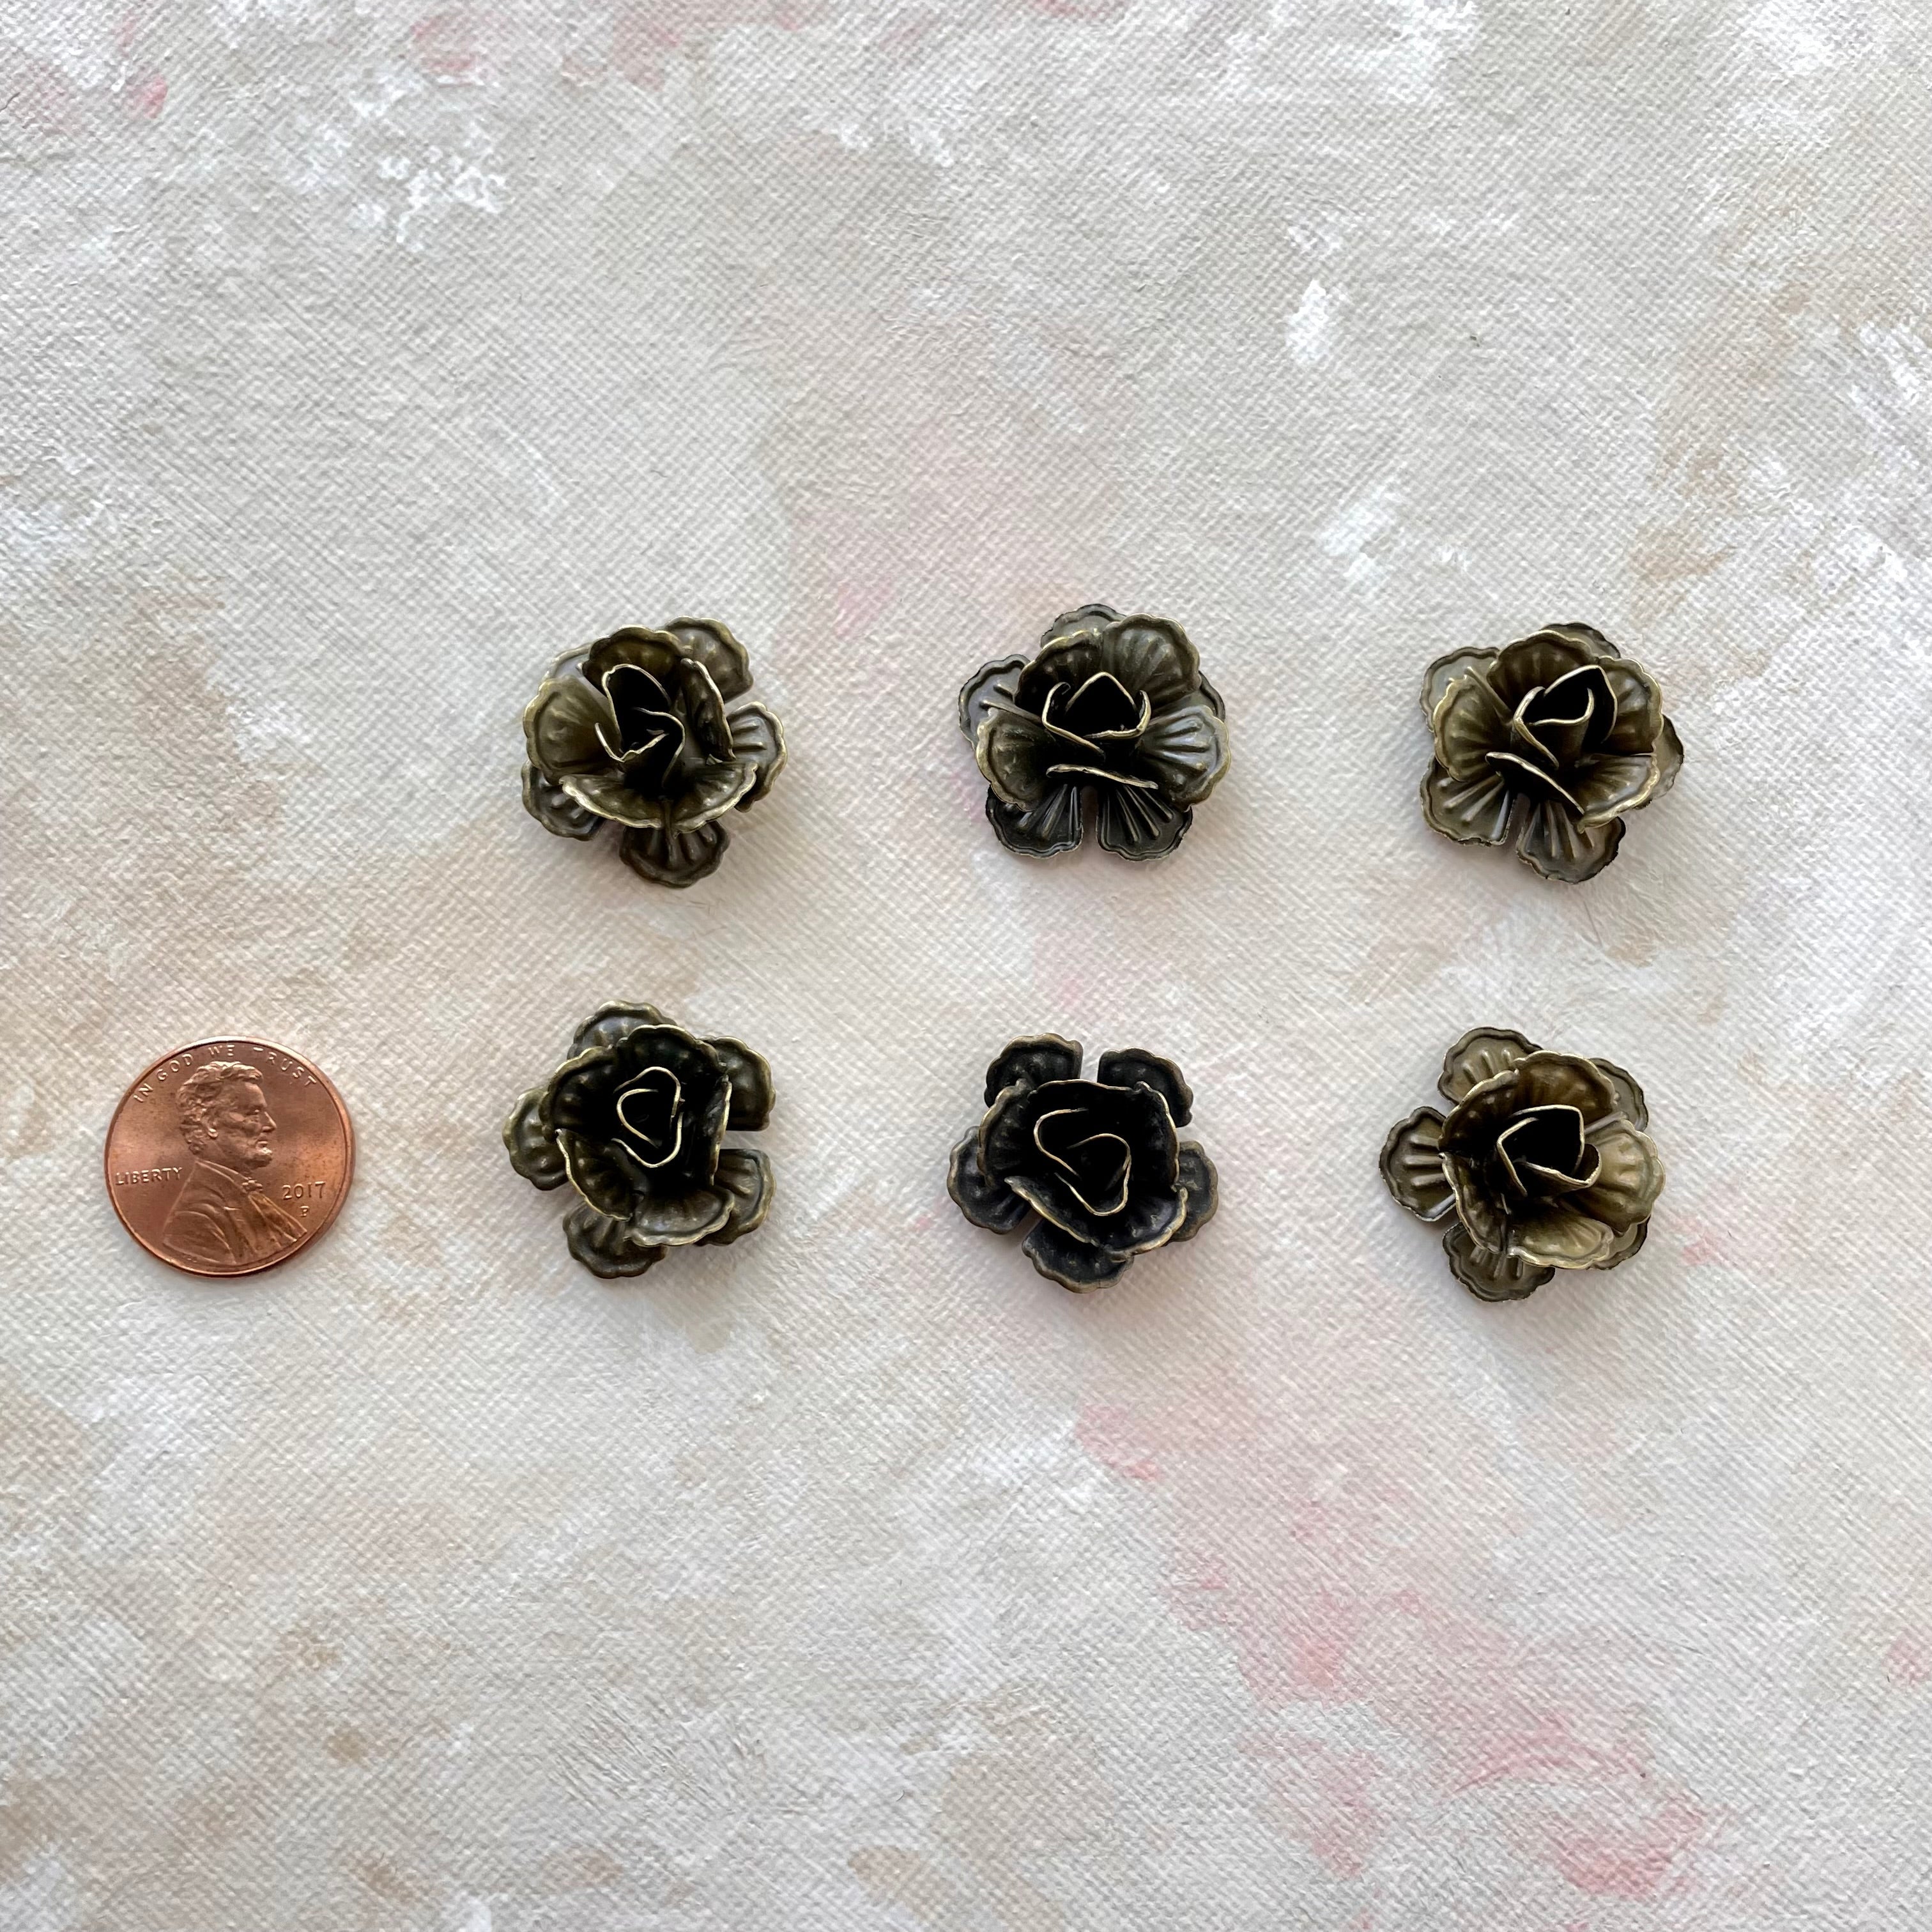 6 small metal styling flower with penny beside for size reference - flat lay props from Champagne & GRIT